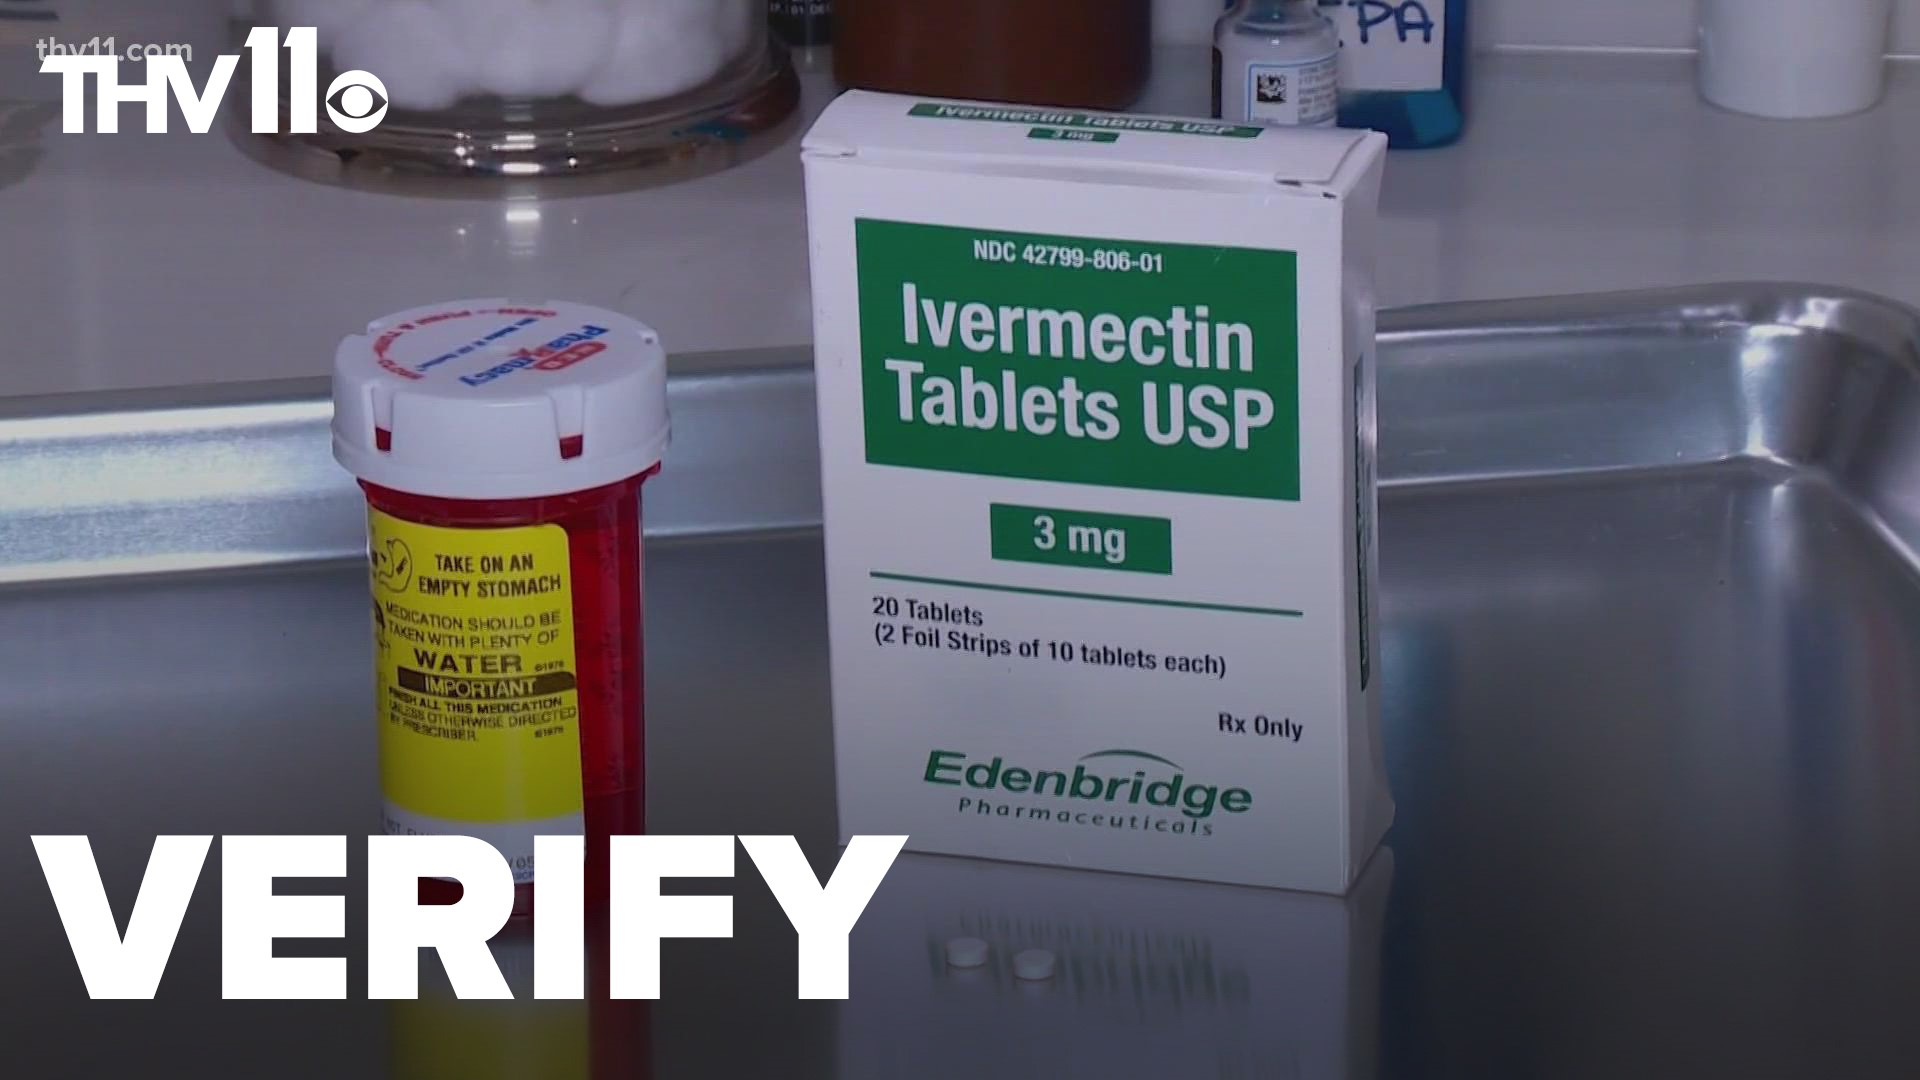 THV11 has received several questions about the safety of Ivermectin, a de-worming medication for horses and cows, and if it's used treat COVID-19 in humans.